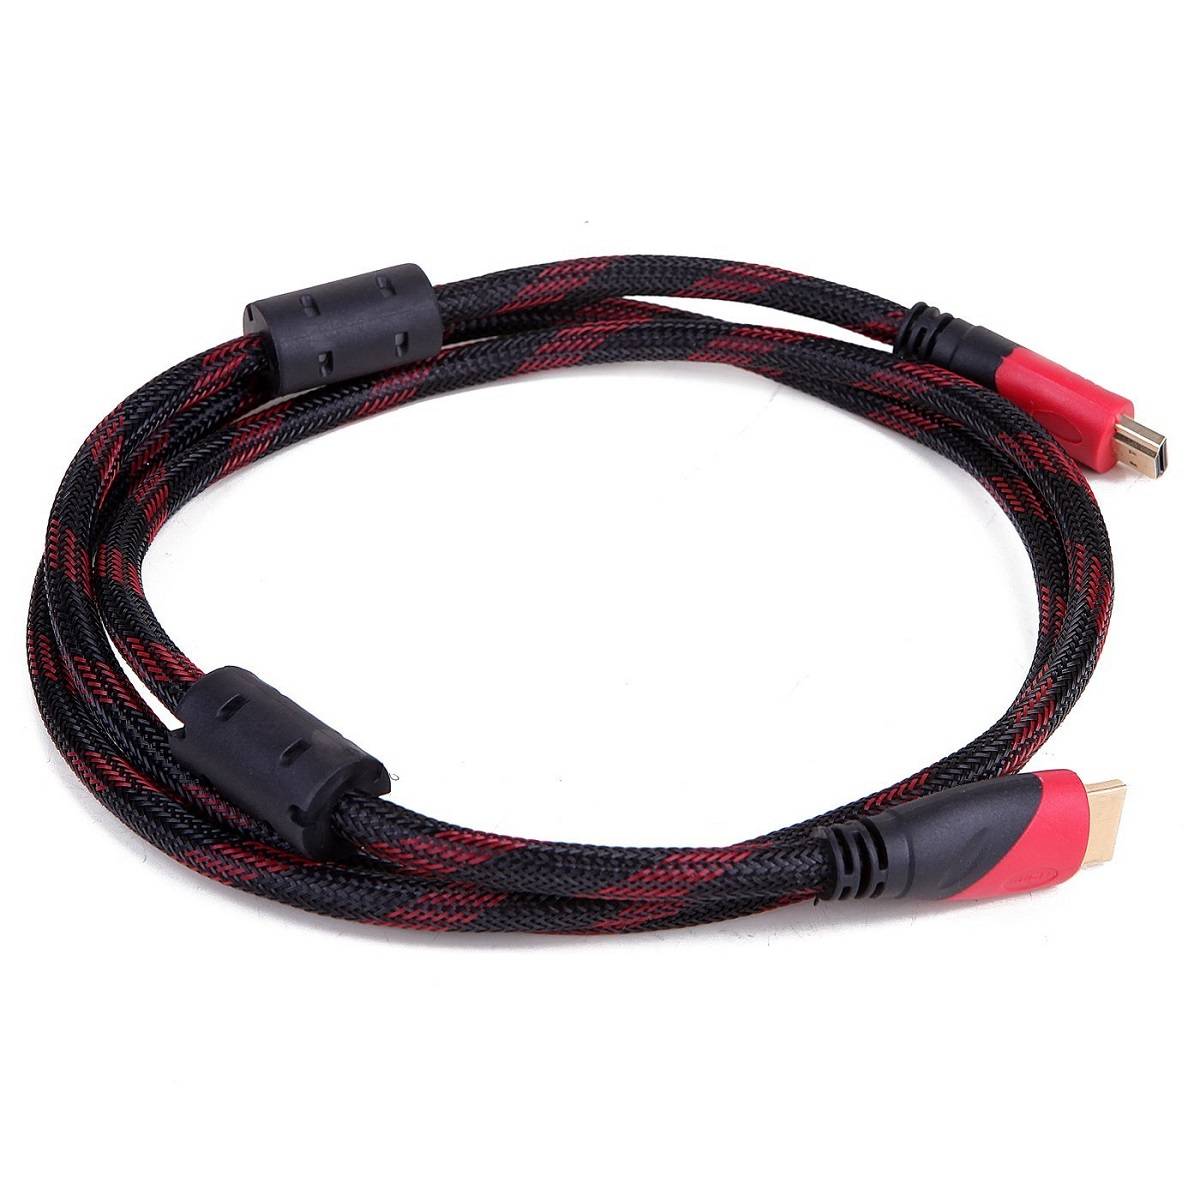 HDMI To Mini HDMI Cable 1.5 Meter sharvielectronics.com